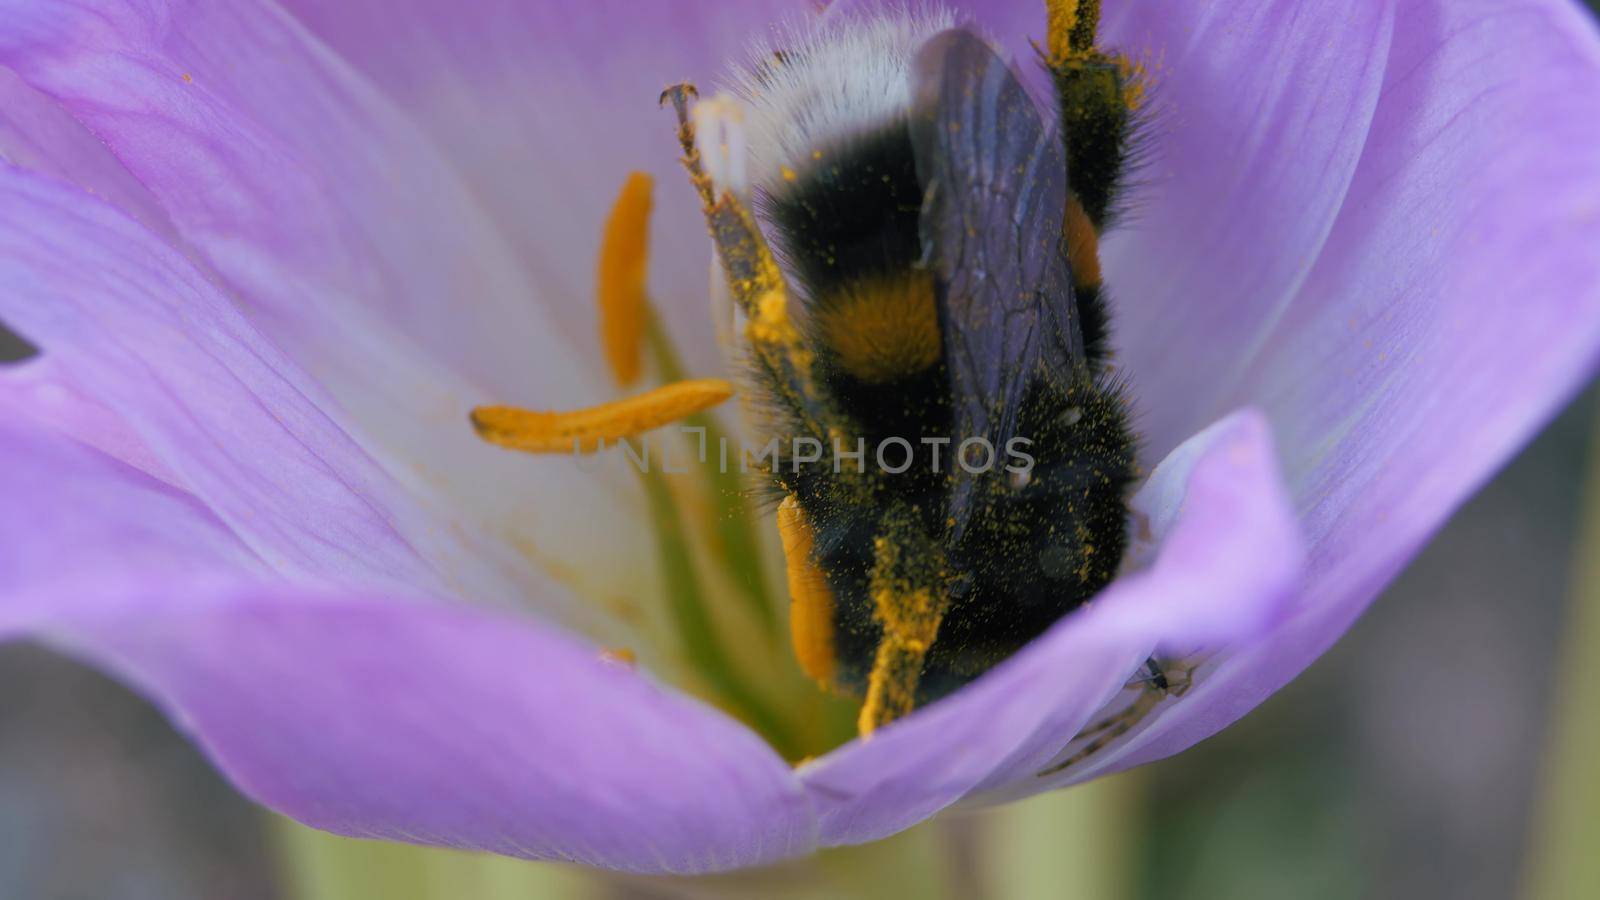 Timeless autumn flower. Blue-purple petals are swaying in the wind. Close-up. Spider and a bumblebee collect pollen from a blue autumn flower. Insect got tangled in the web.